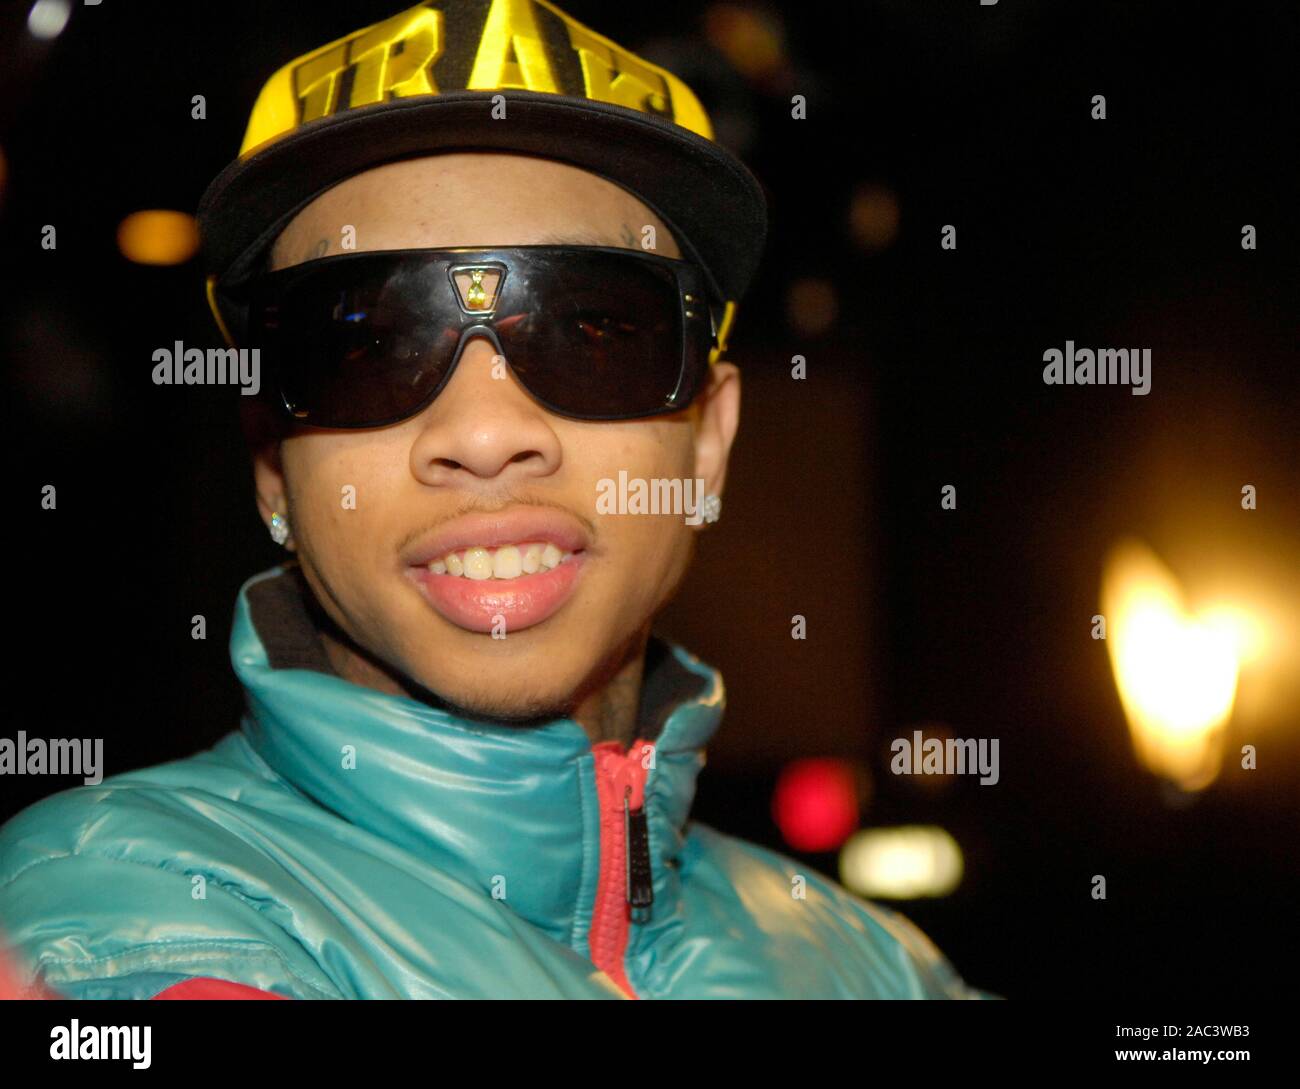 Tyga backstage at the Roxy on March 25, 2009 in West Hollywood, California. Stock Photo